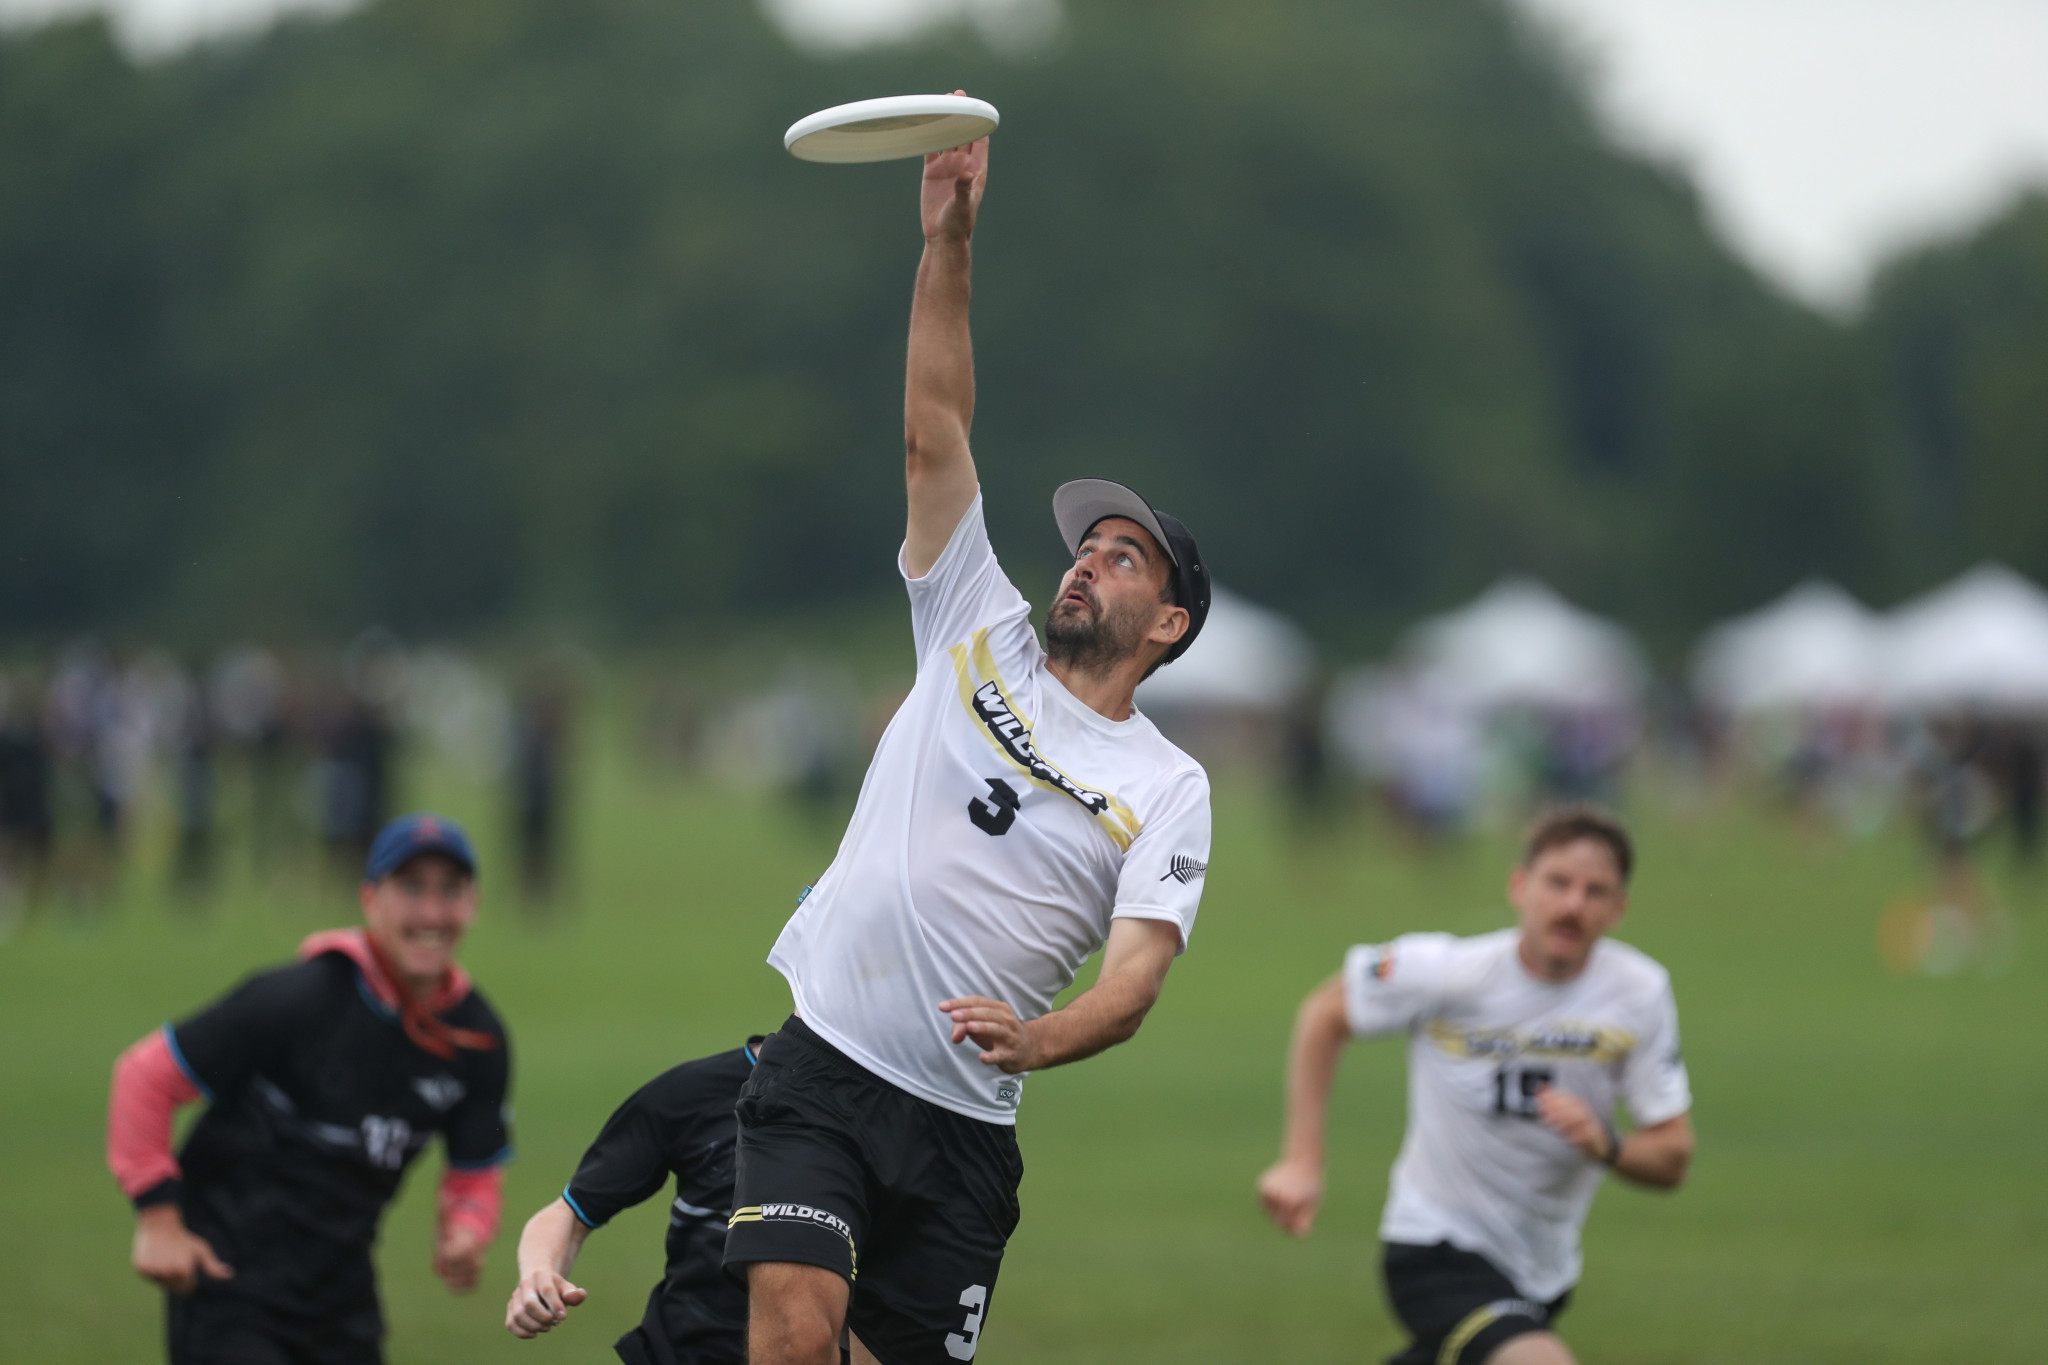  Wildcat's Josh Broughton tallied one goal from three games in Pool N of the open event ©Paul Rutherford for UltiPhotos